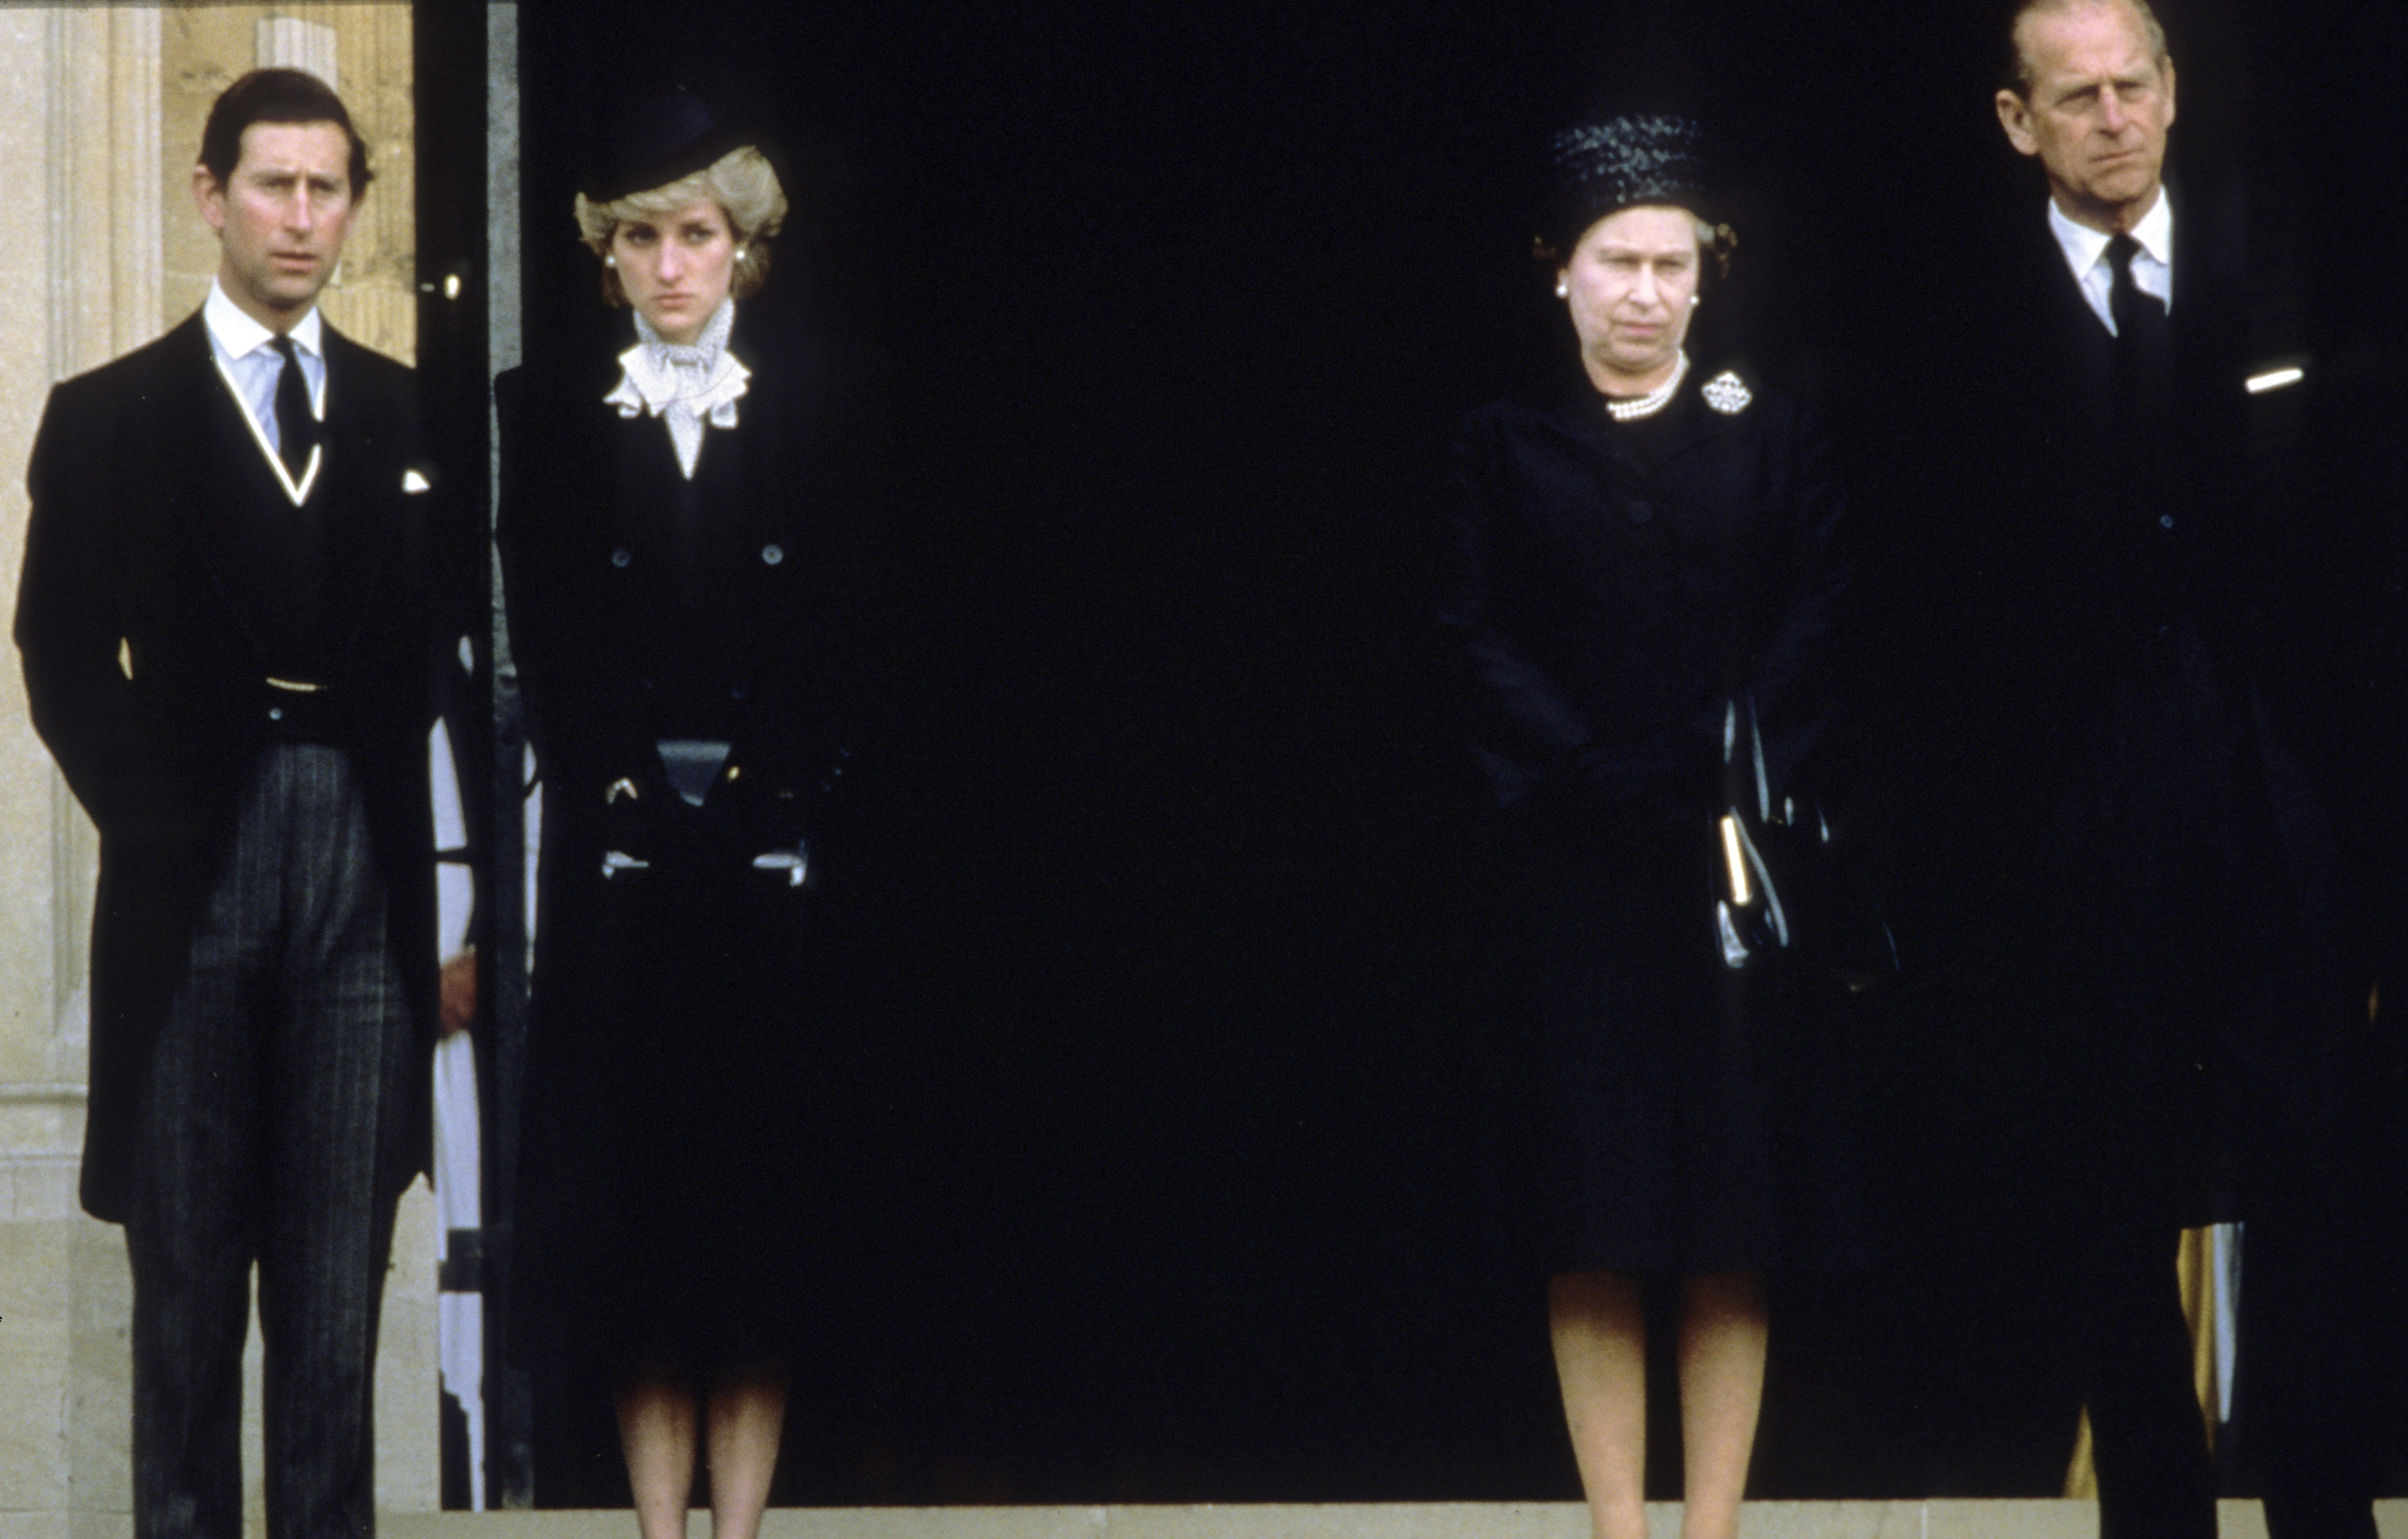 <p>Prince Charles (now King Charles III), Princess Diana, Queen Elizabeth ll and Prince Philip attended the funeral of the Duchess of Windsor -- the former Wallis Simpson, widow of the Duke of Windsor (formerly King Edward VIII, who abdicated so he could marry her) -- at St. George's Chapel at Windsor Castle on April 29, 1986. </p><p>Wallis died at her home in Paris that April 24 -- two months before her 90th birthday and eight months before the 50th anniversary of Edward's abdication. Wallis is interred next to him in the Royal Burial Ground at Frogmore House in Windsor, England.</p>